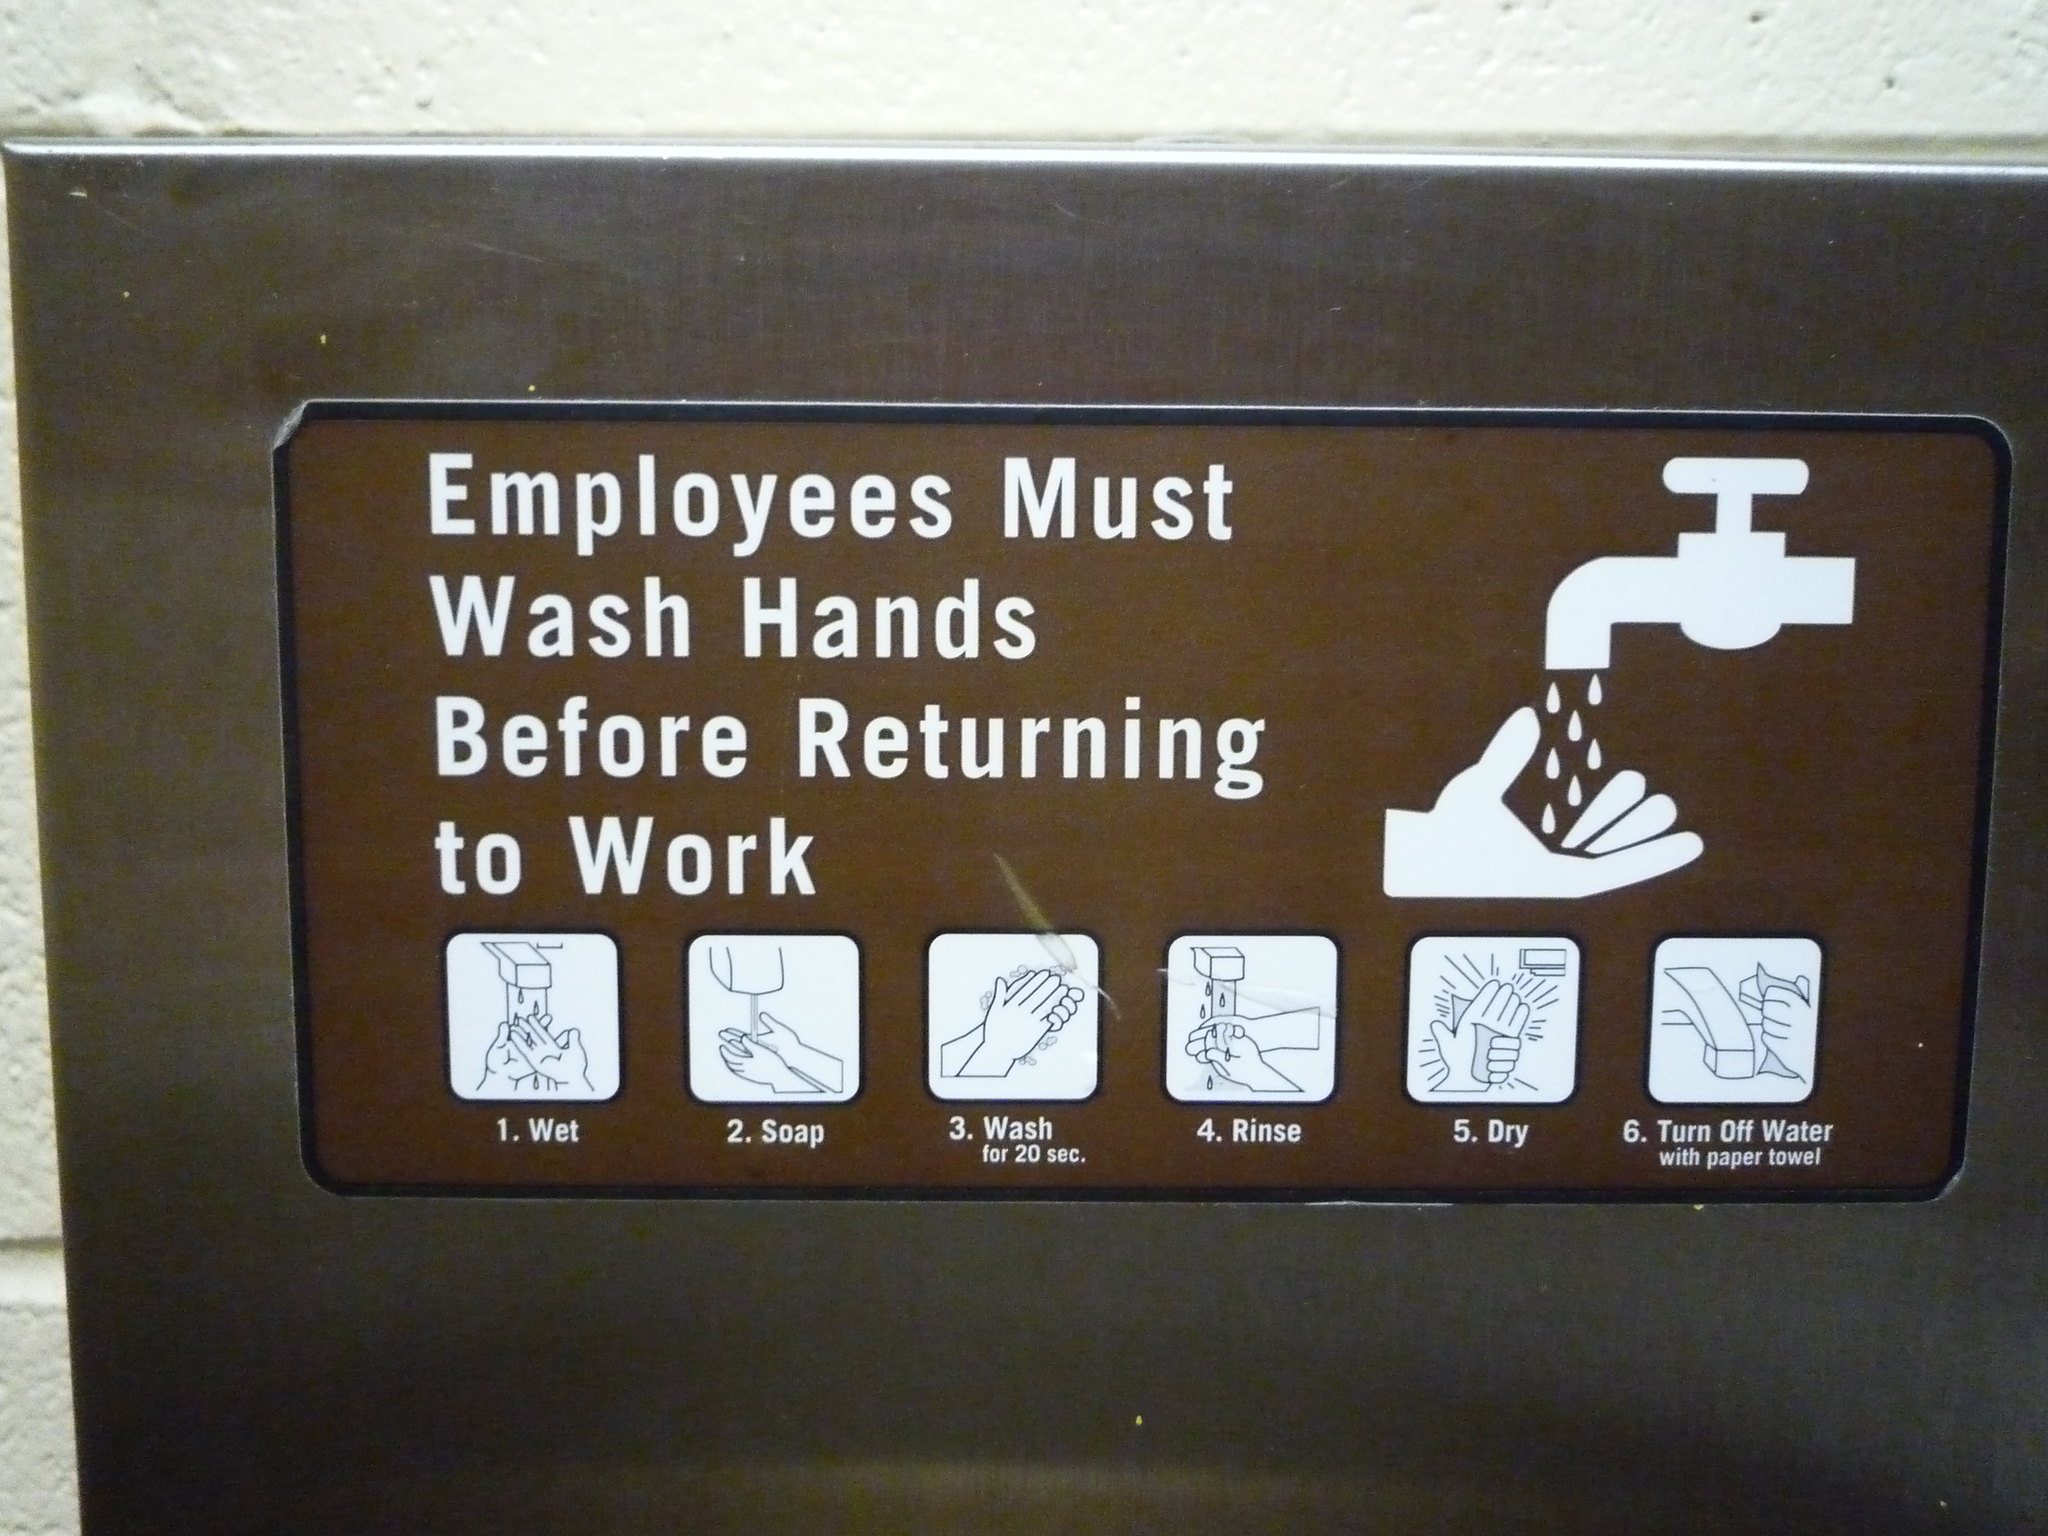 A sign describing proper hand washing, from wetting the hands to turning off the water.